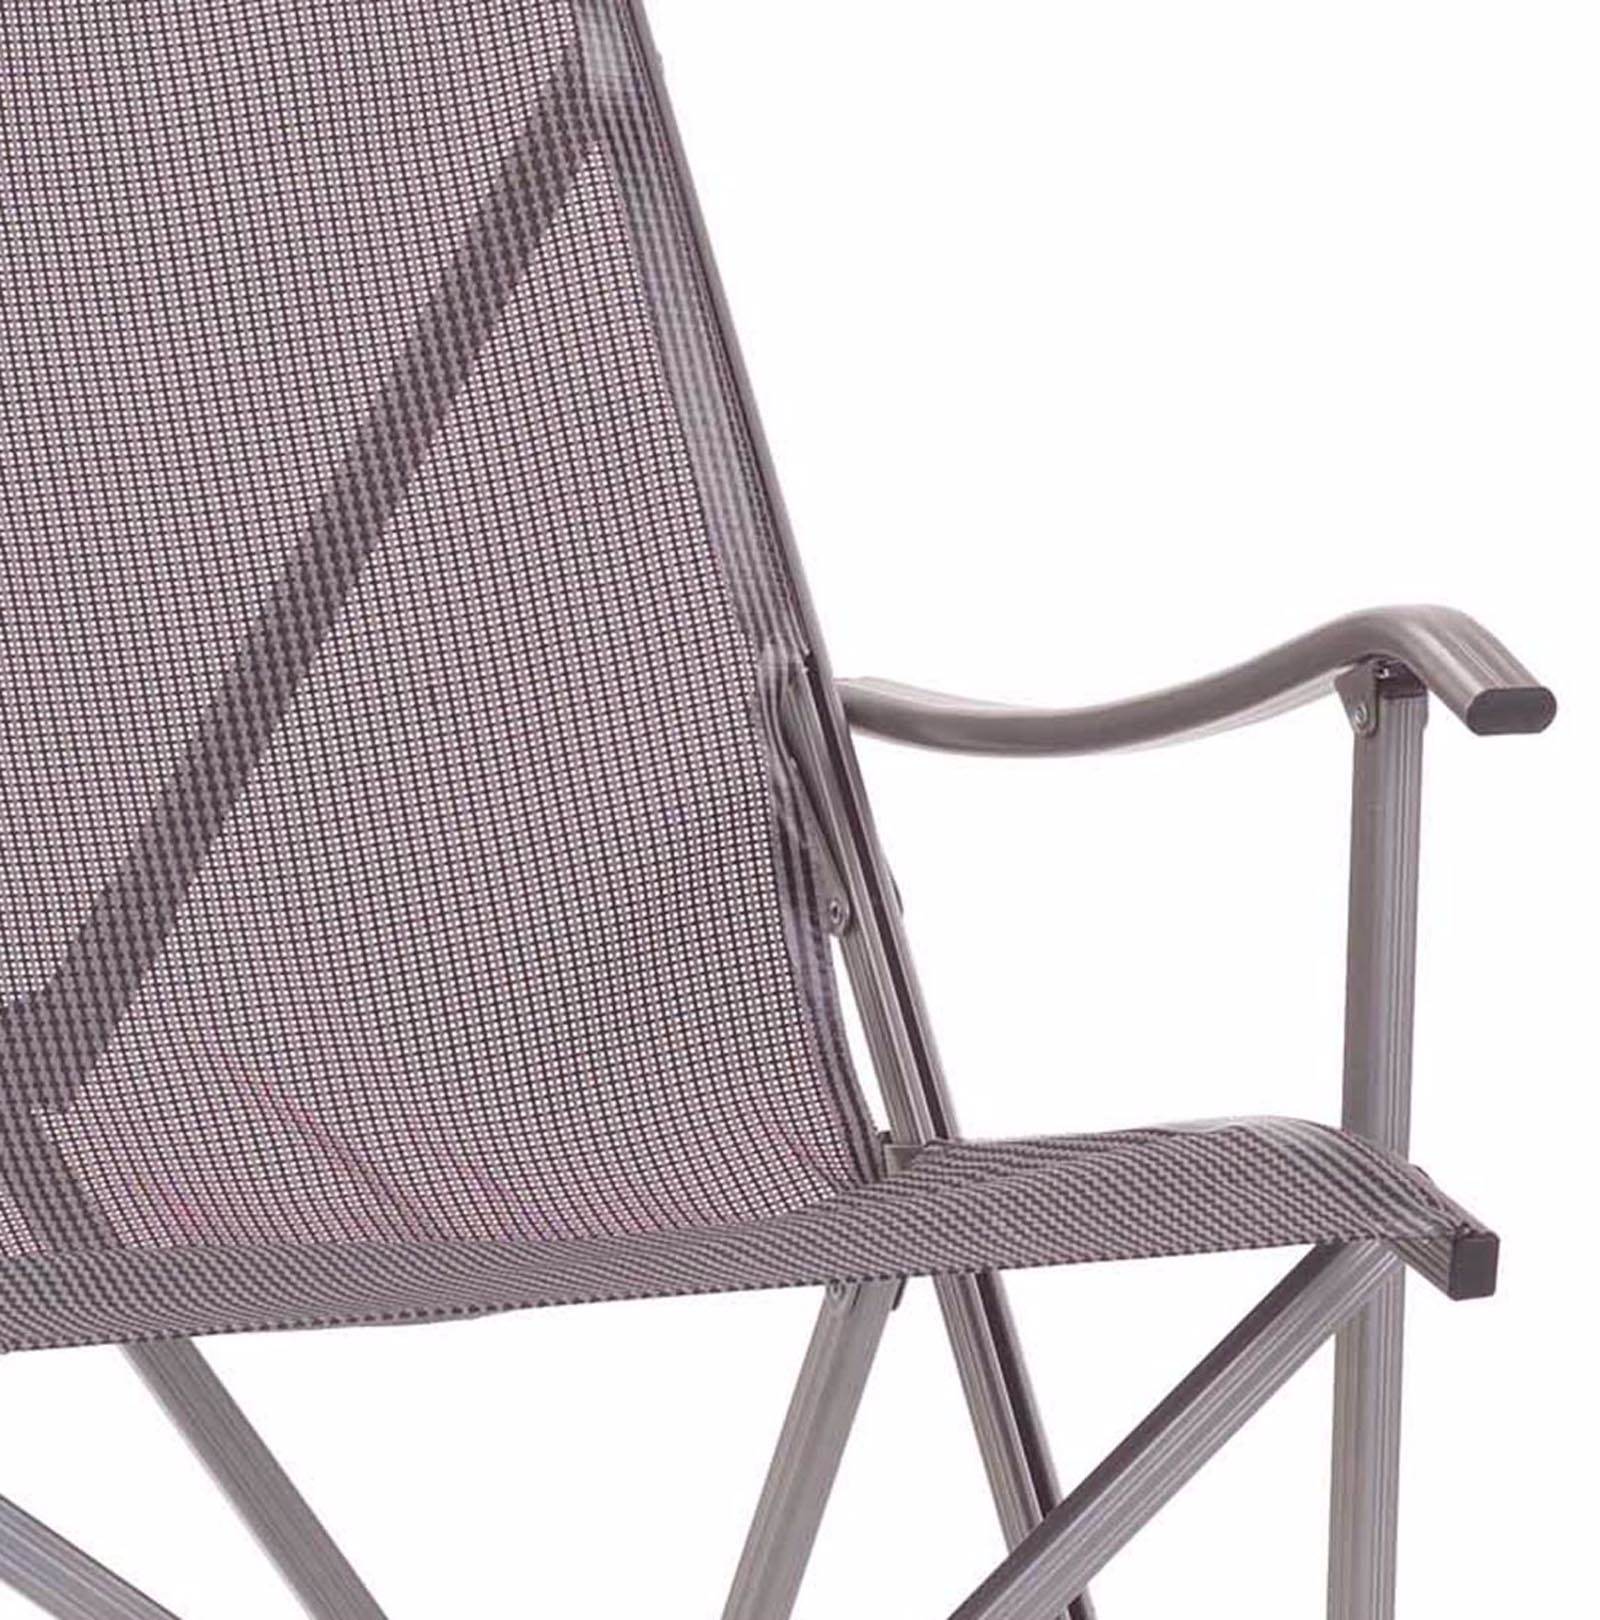 Coleman Patio Weather-Resistant Adult Sling Chair with Drink Holder, Gray - image 3 of 8